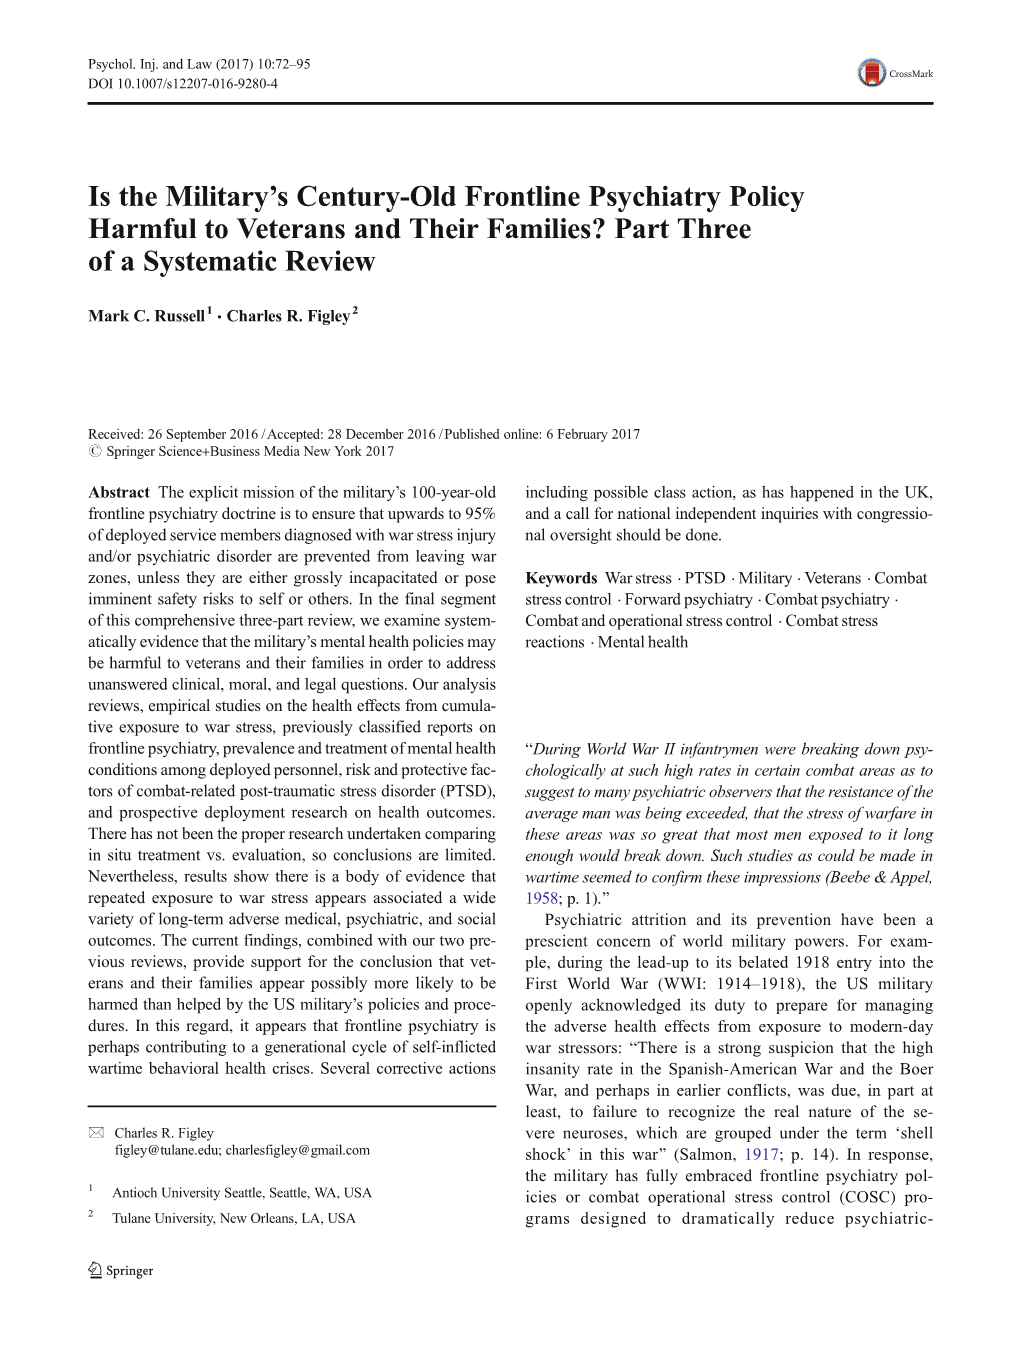 Is the Military's Century-Old Frontline Psychiatry Policy